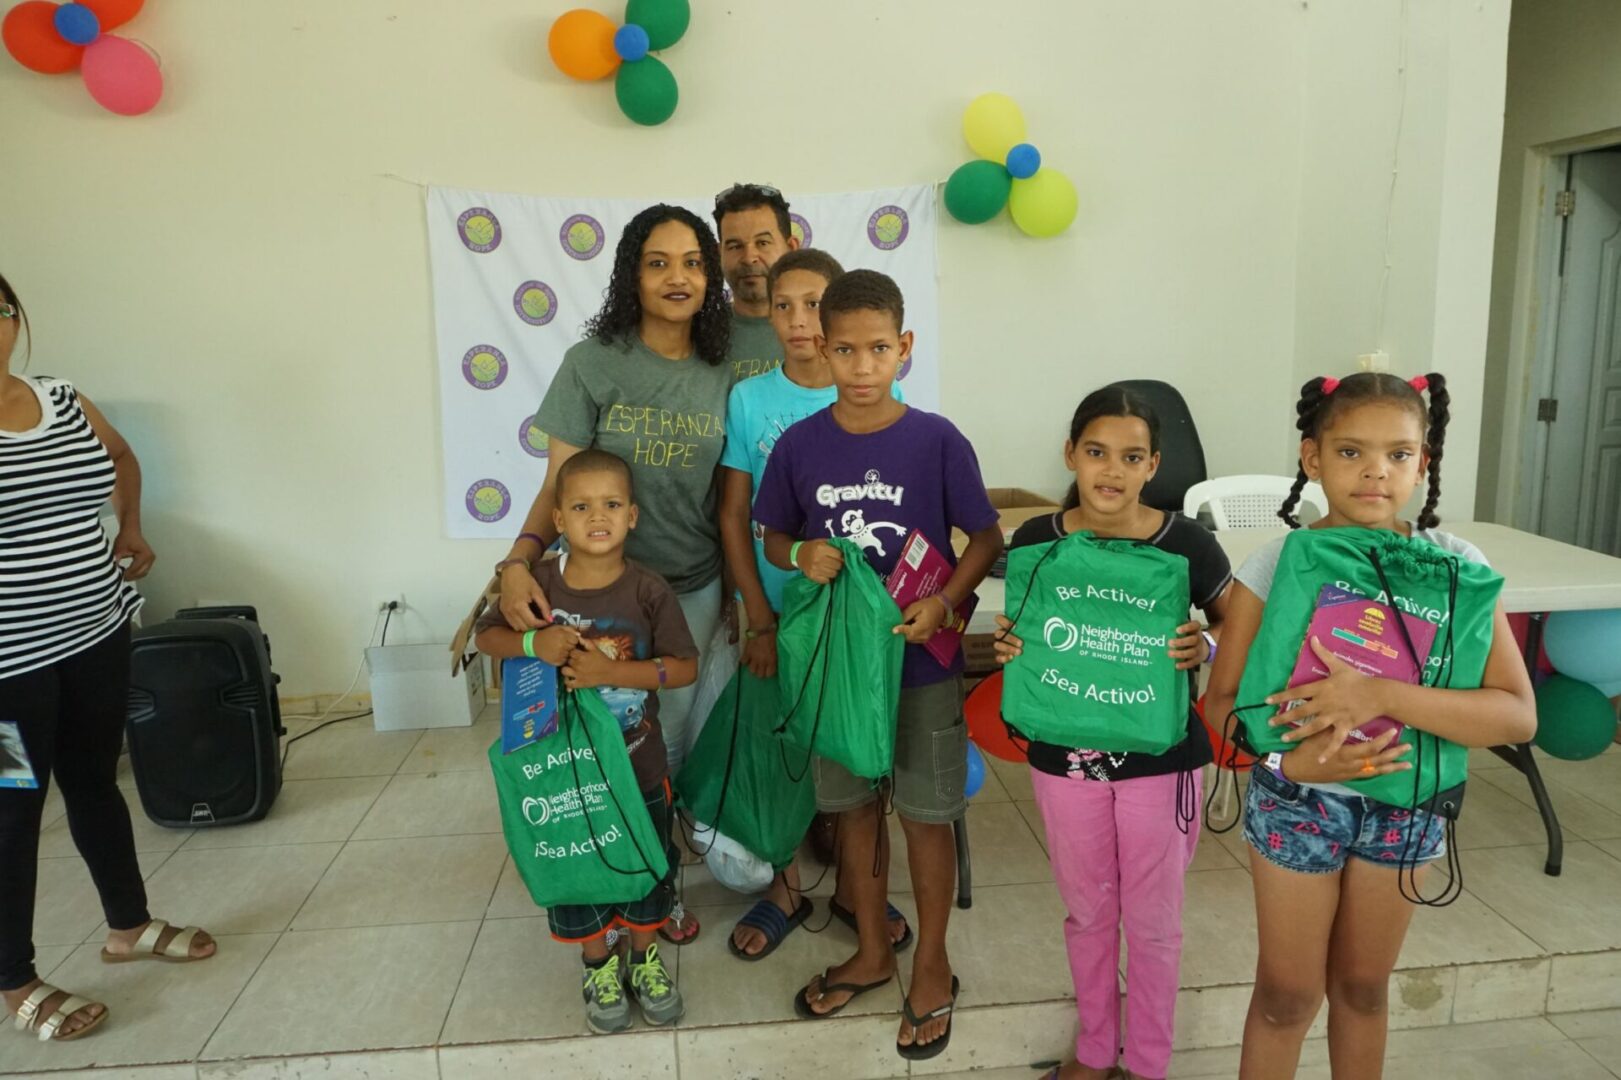 Two staff and a group of children holding a green string bag